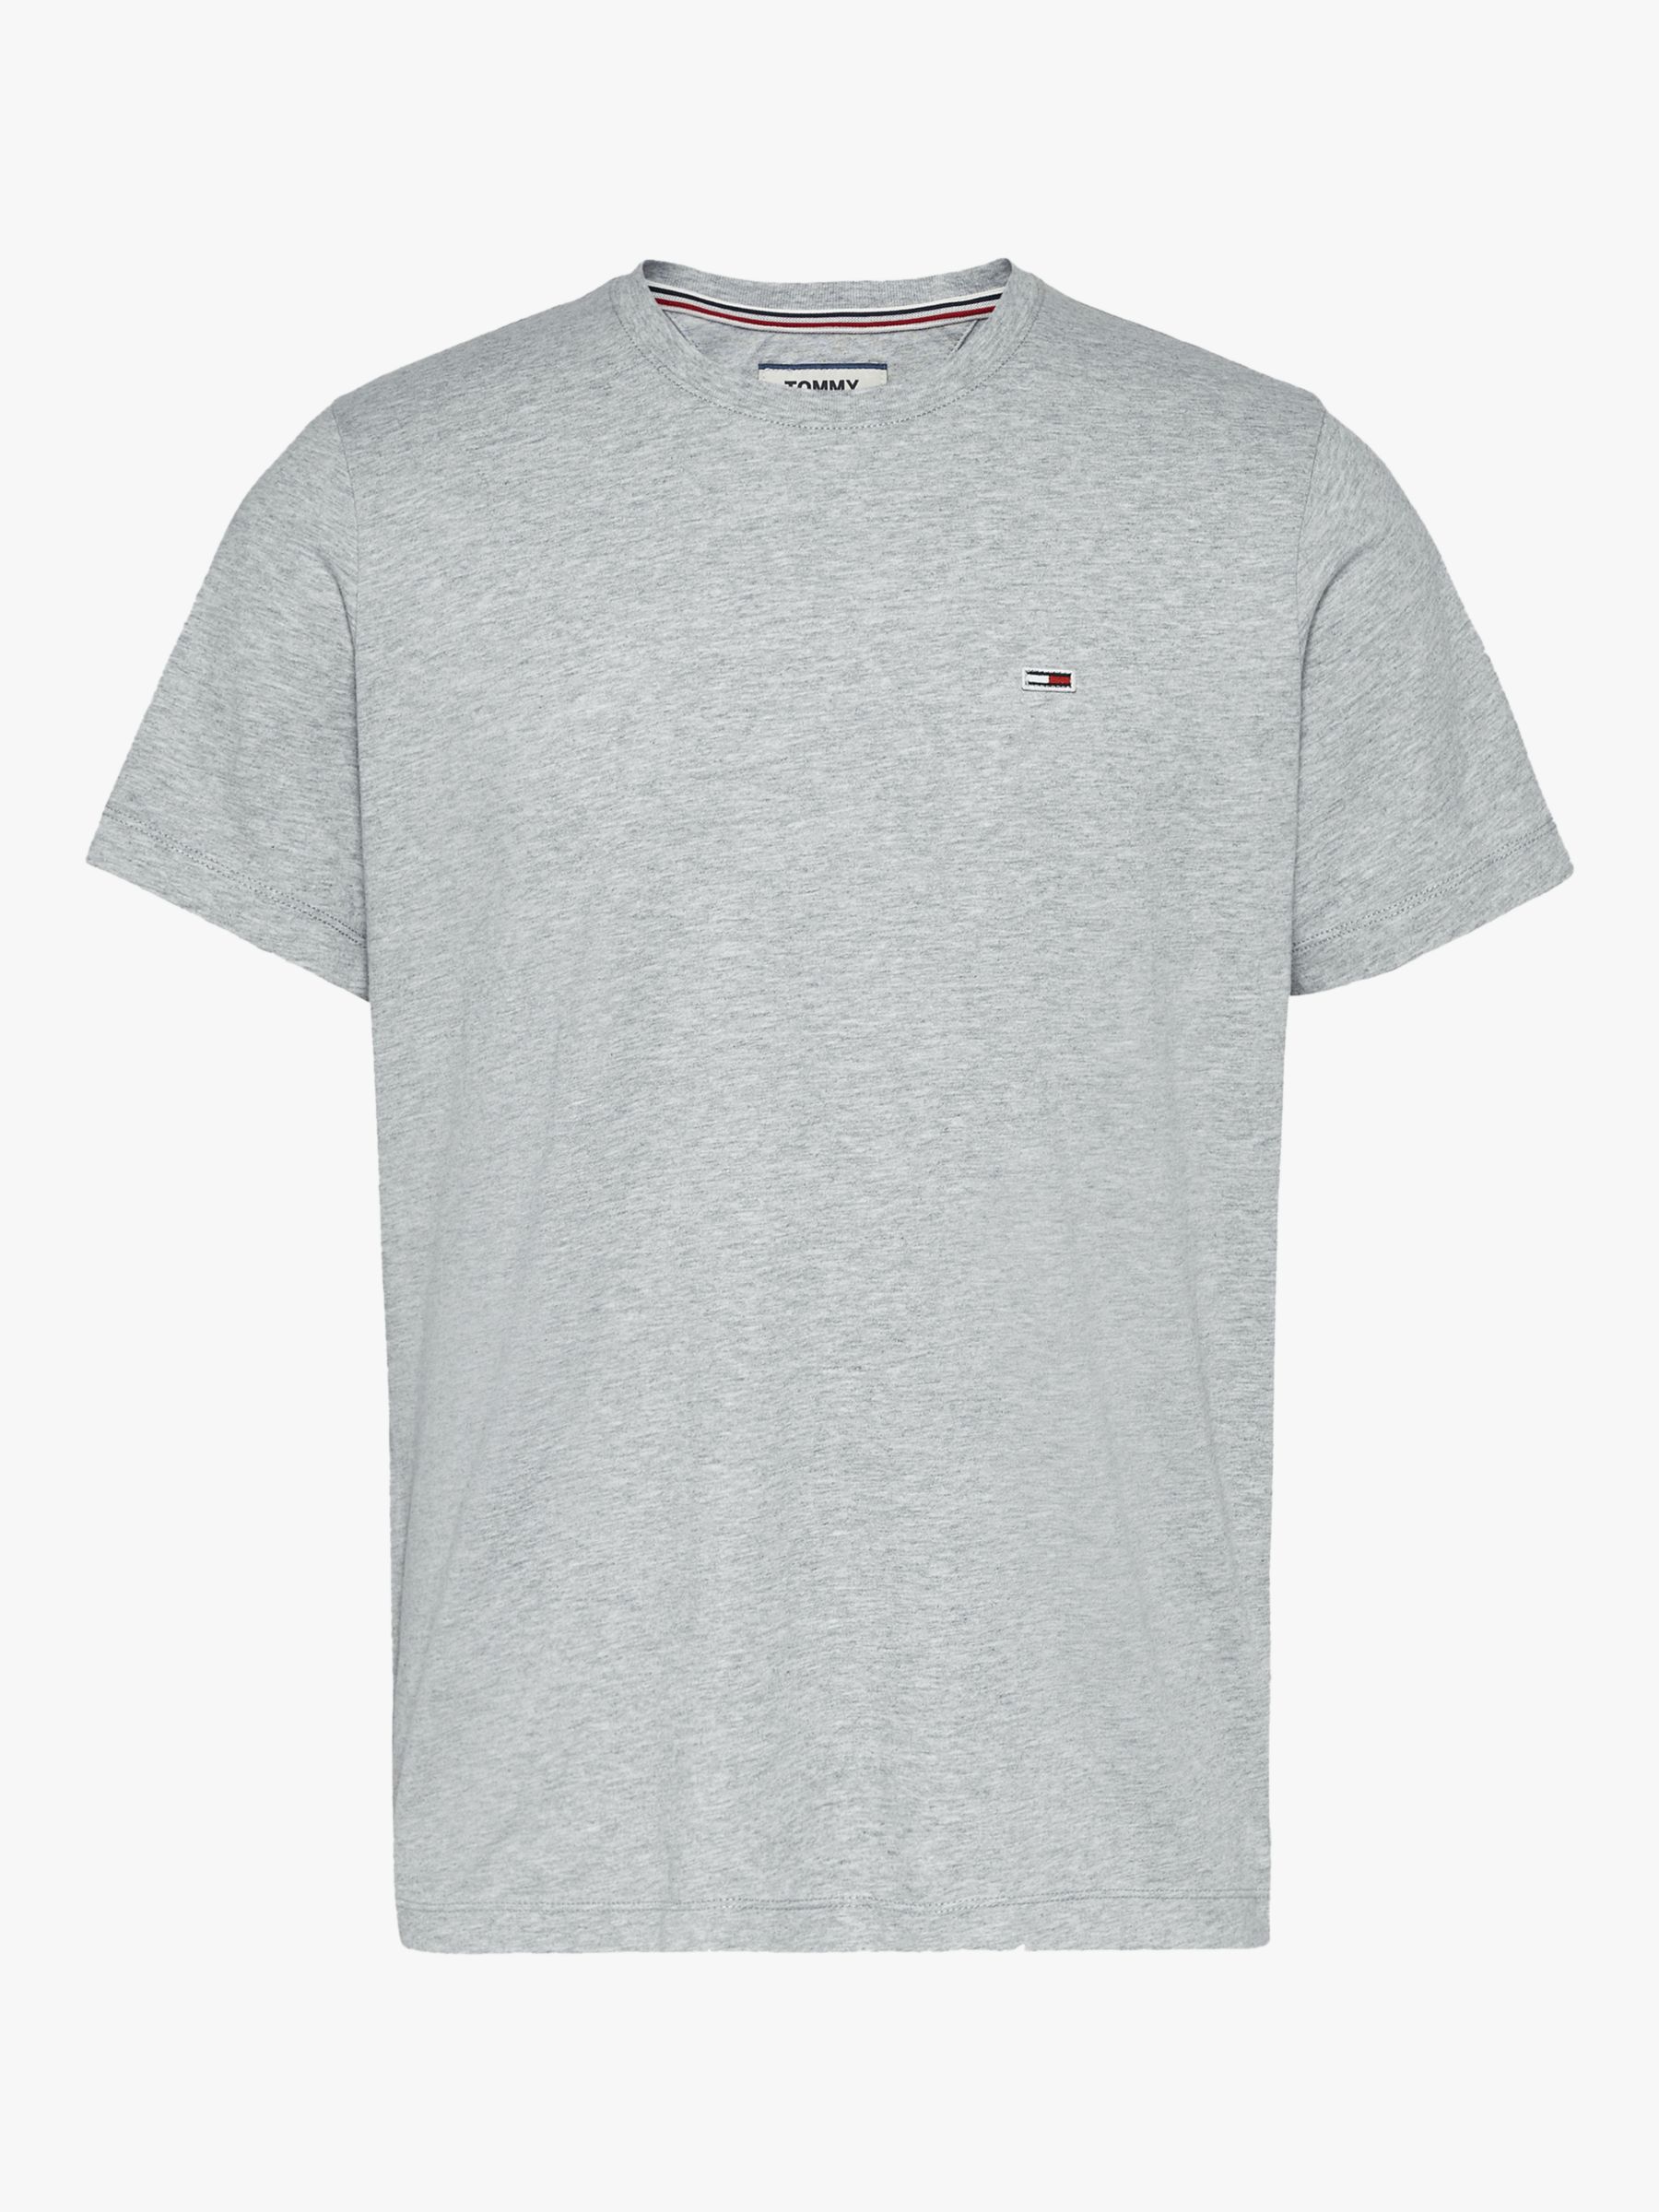 Tommy Jeans Jersey Crew Neck Tee, Grey at John Lewis & Partners